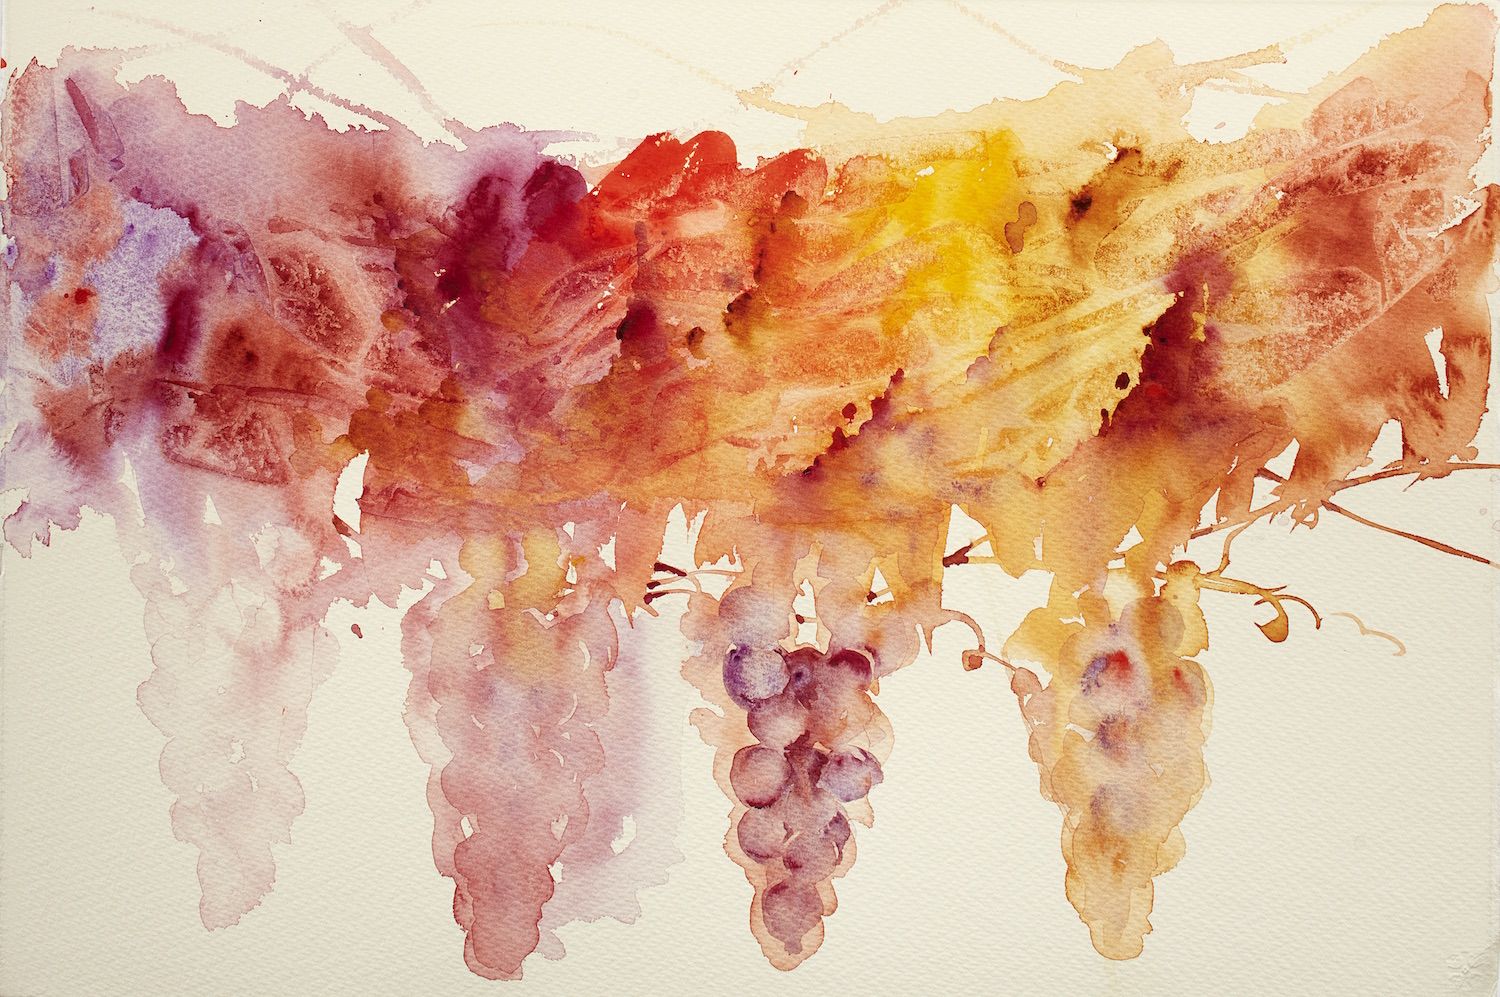 100 Easy watercolor paintings to fill your time with